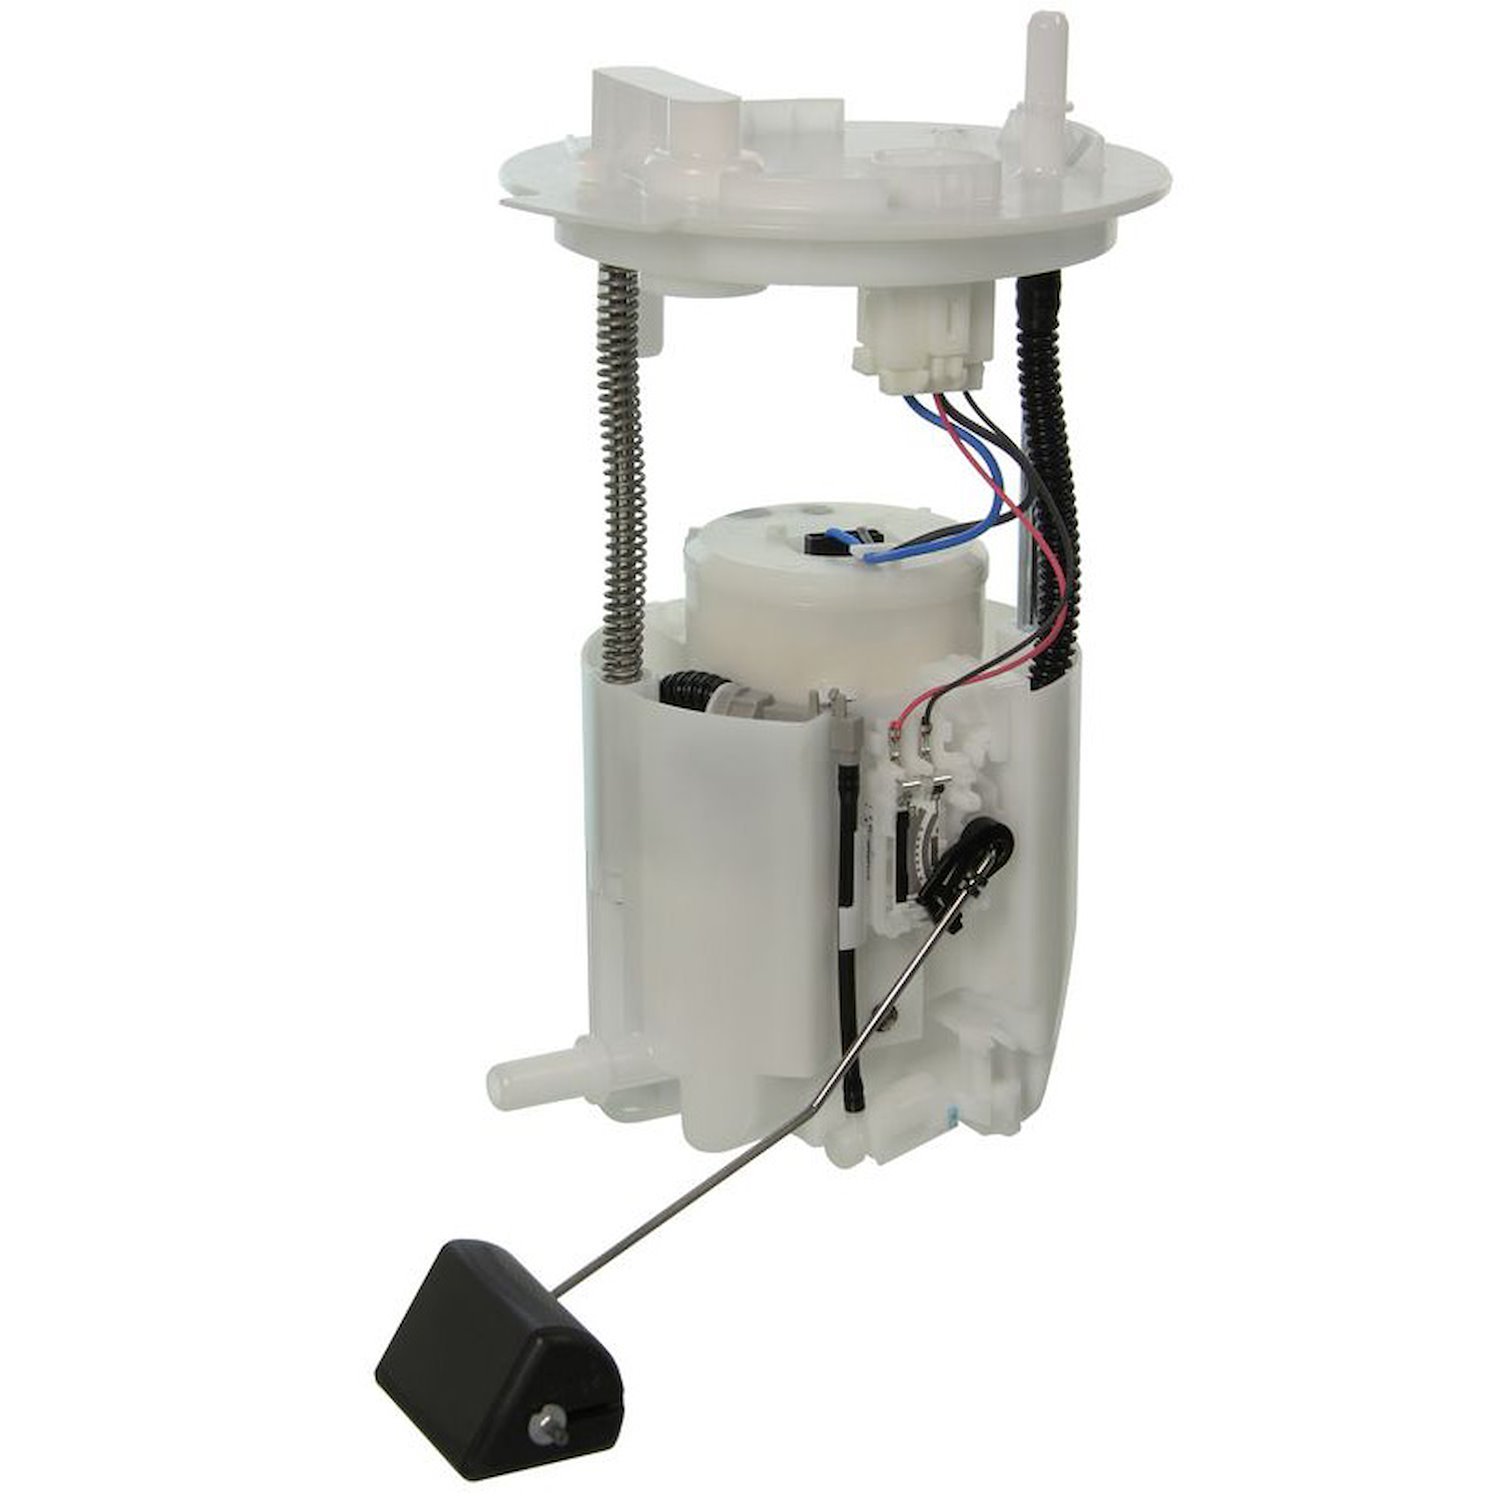 OE Ford/Lincoln Replacement Fuel Pump Module Assembly for 2010-2012 Ford Flex/Lincoln MKT